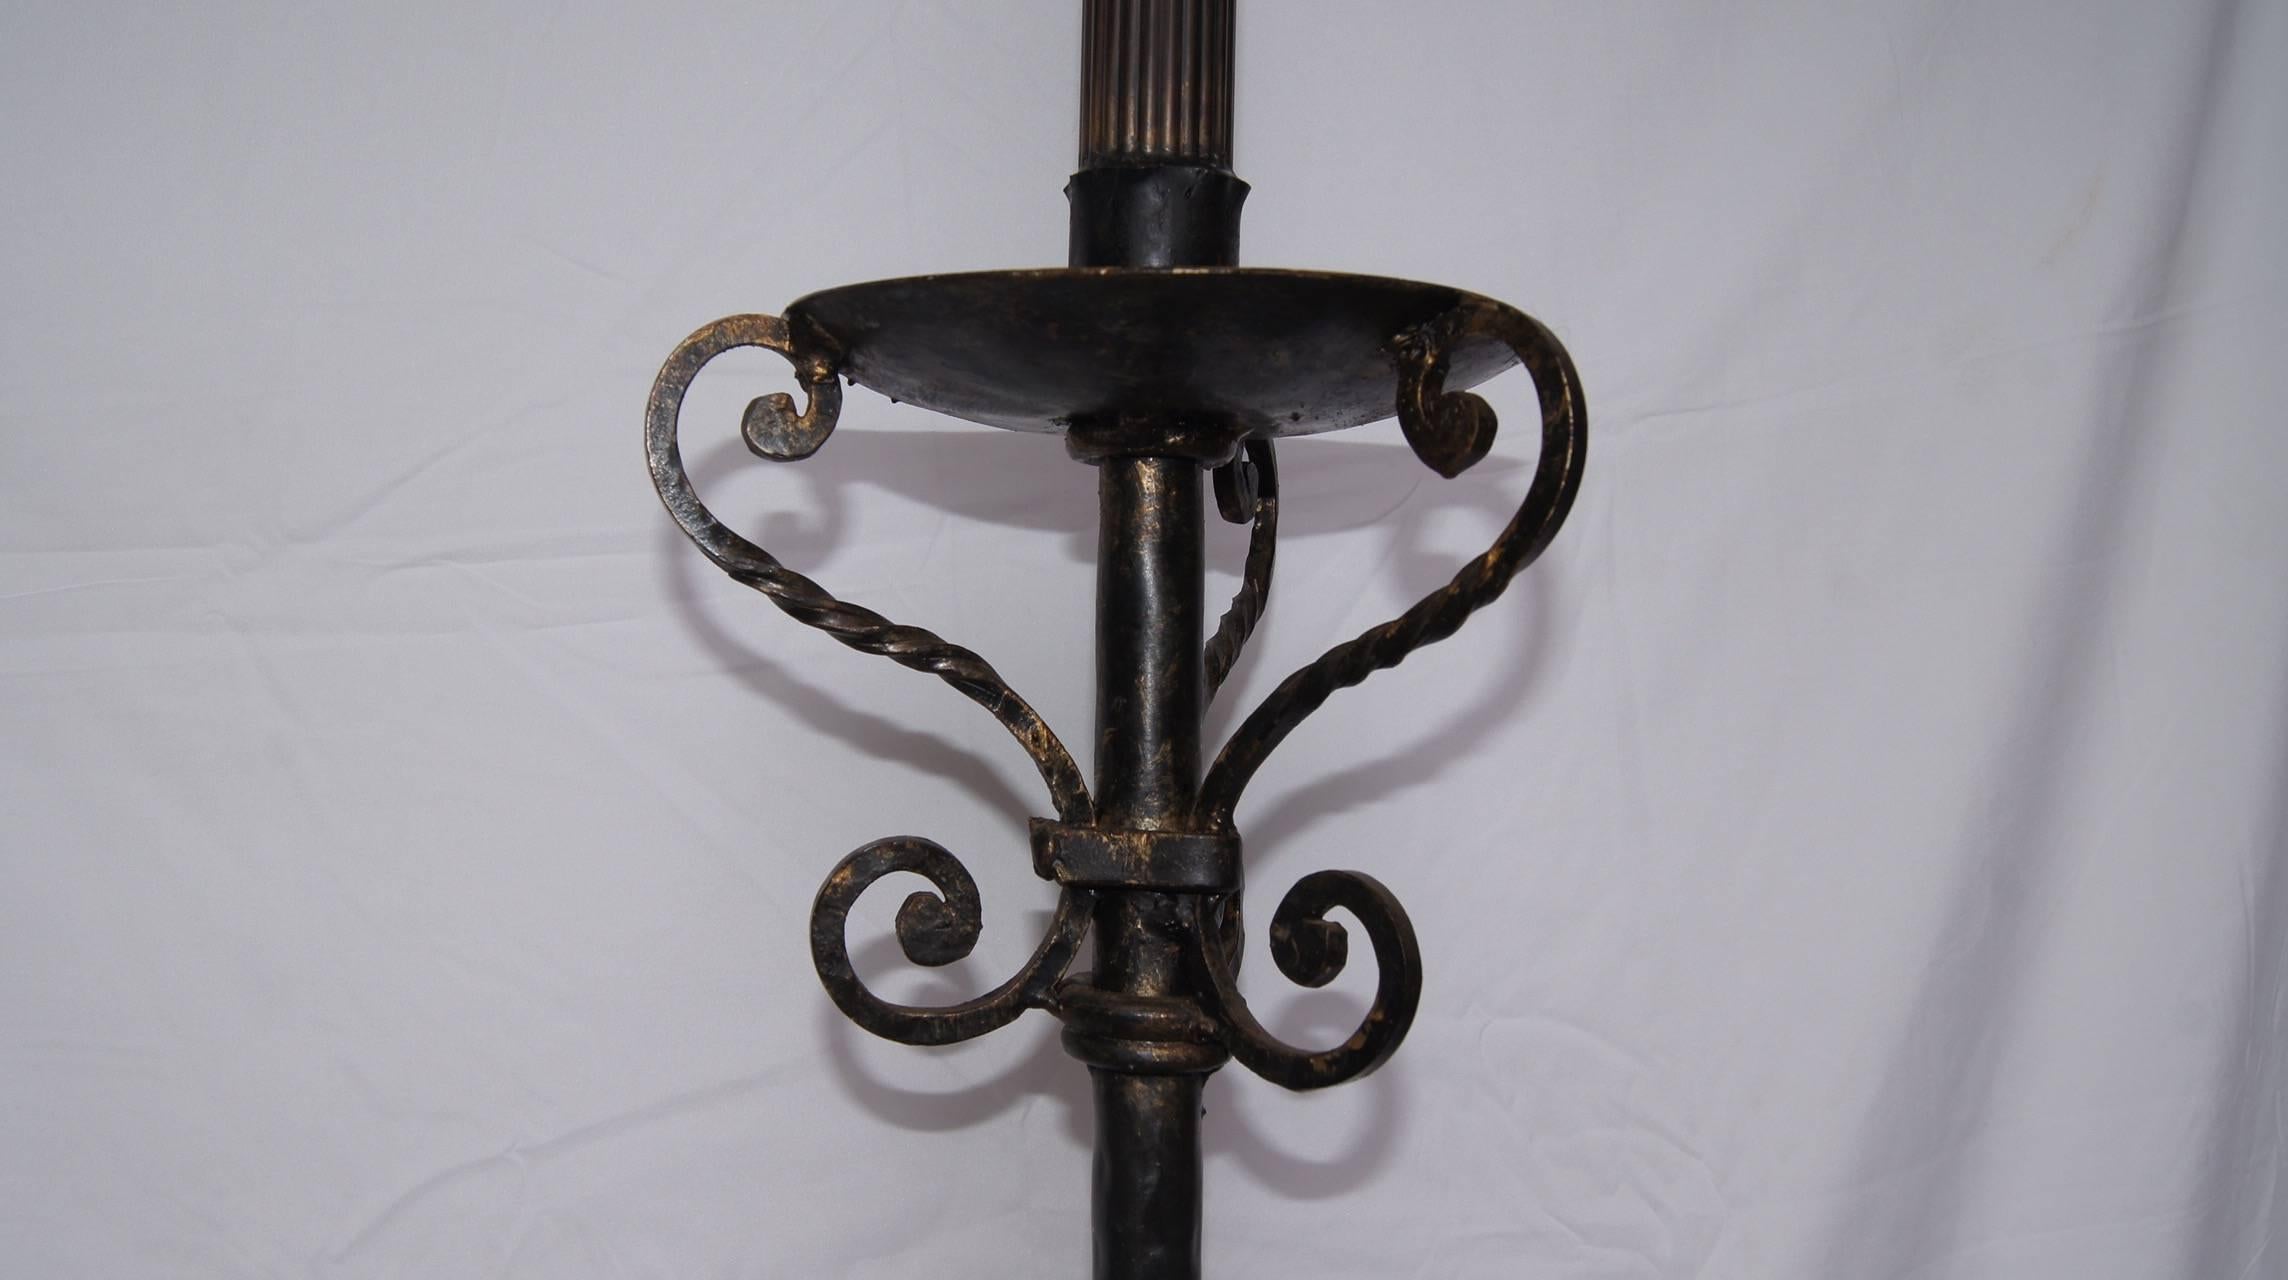 Pair of 1930s wrought iron floor lamps with hammered texture, scrolling motif on body and legs.

Height of body alone 50